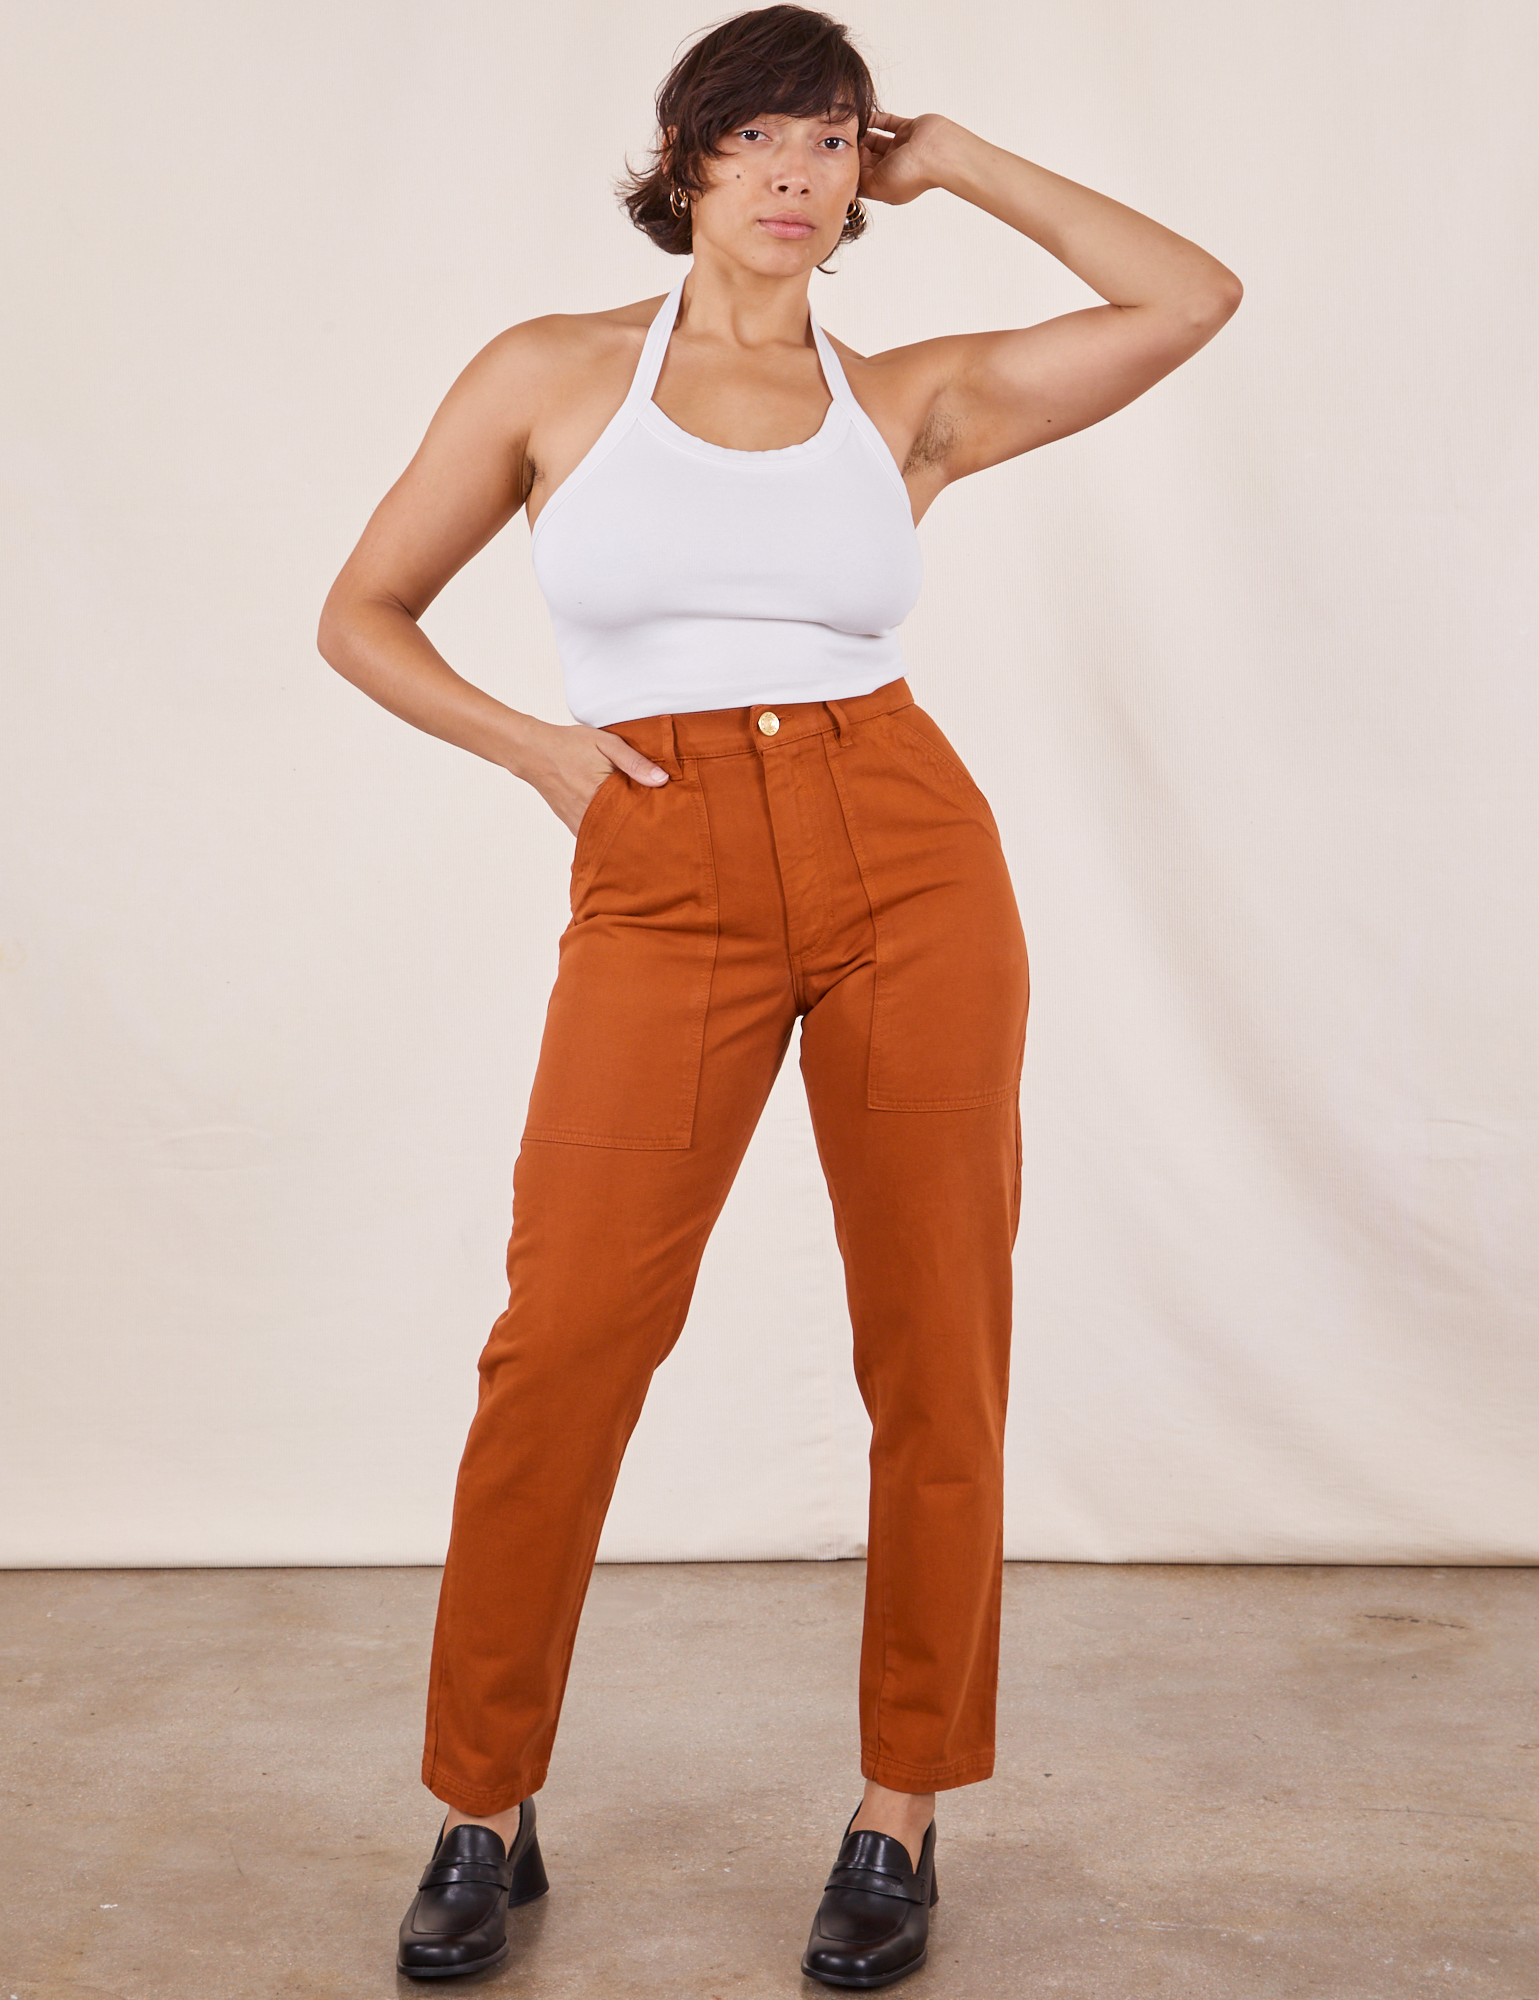 Tiara is 5'4" and wearing XS Pencil Pants in Burnt Terracotta paired with Halter Top in vintage tee off-white